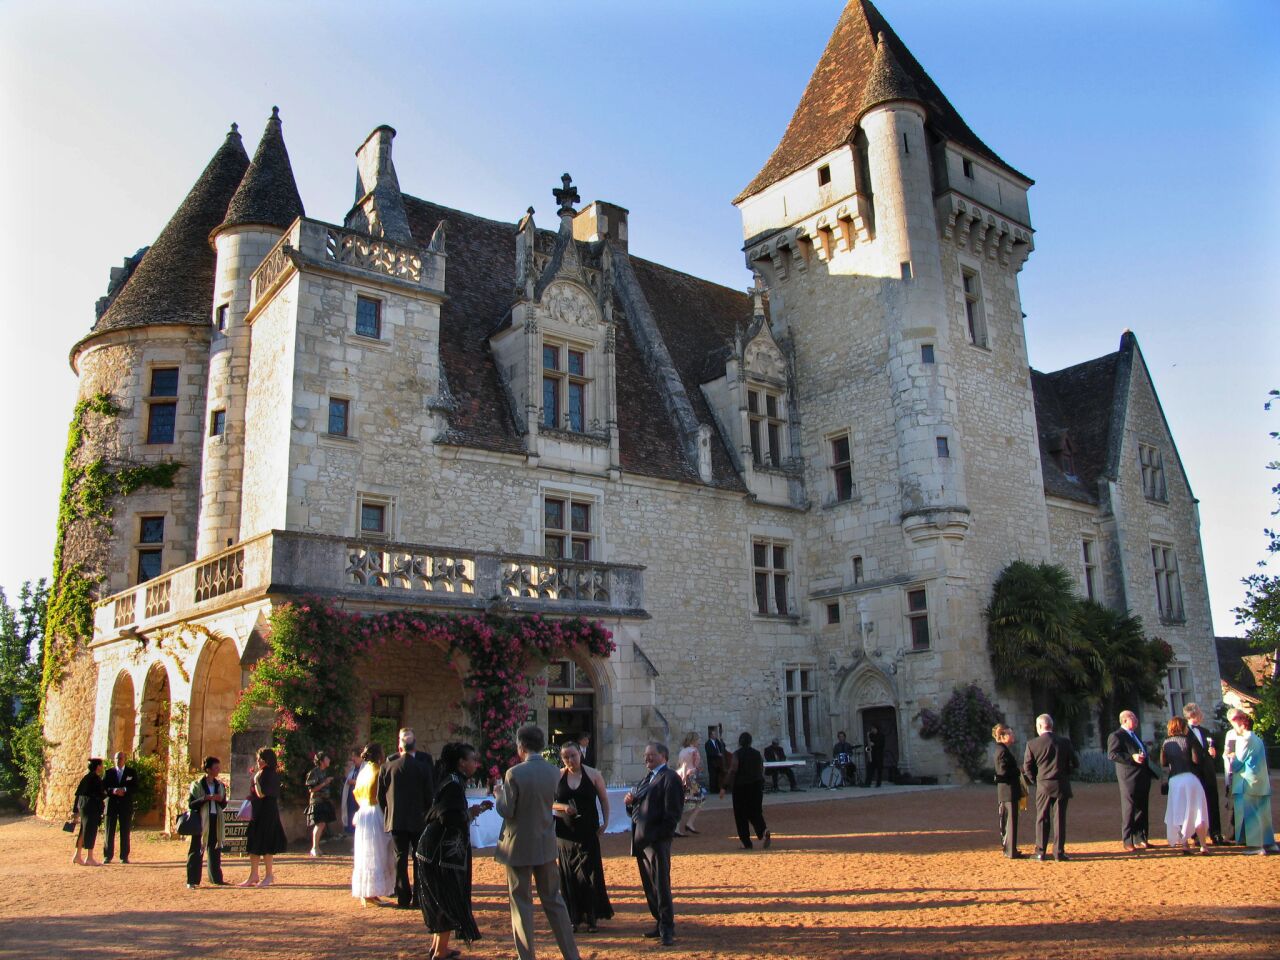 The late Gothic/early Renaissance castle was built in 1489 by François de Caumont for his wife, Claude de Cardaillac. The medallions honoring him on the chimney of the small dining room were added by a later owner, Charles Claverie, who began a full-scale restoration in 1900. -- Susan Spano